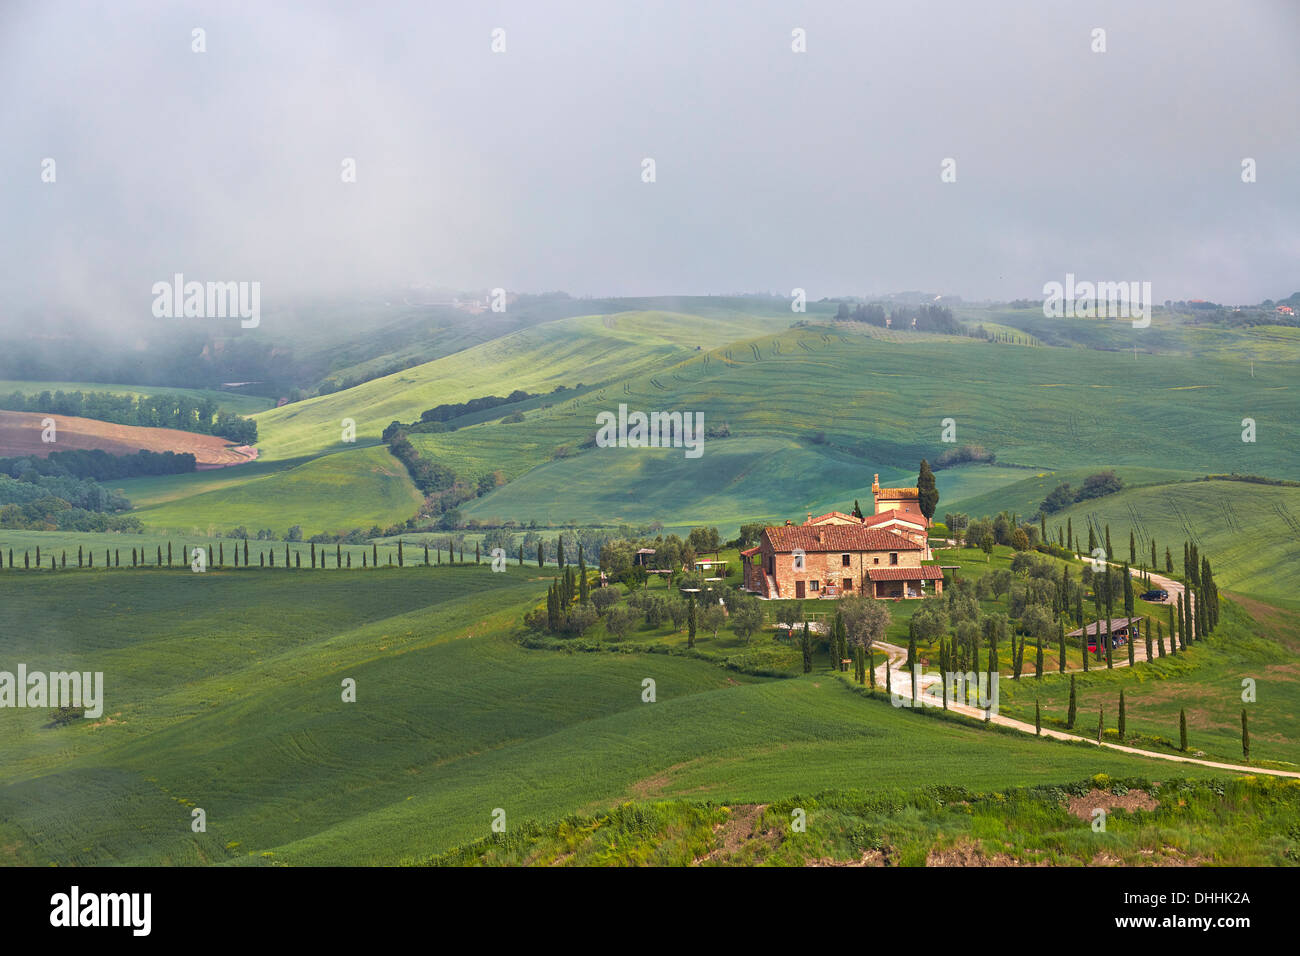 Hilly landscape around Podere Baccoleno, Chiusure, Province of Siena, Tuscany, Italy Stock Photo